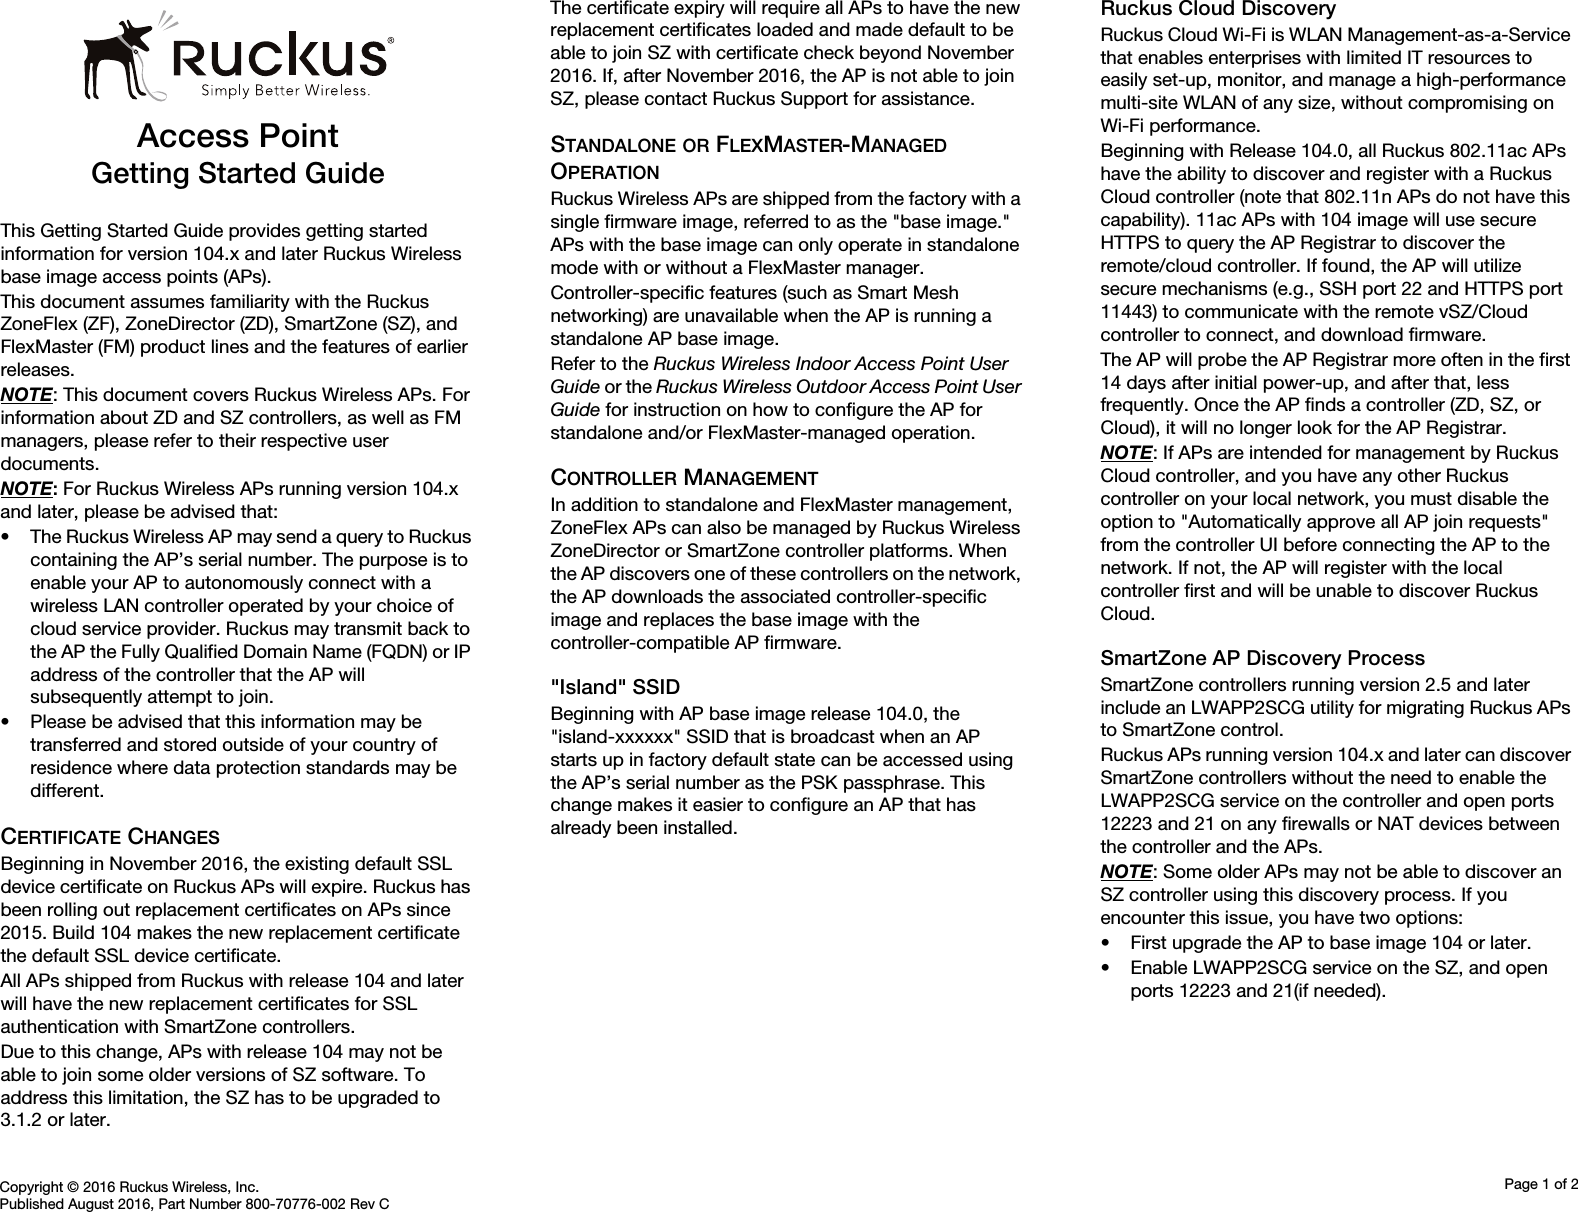 Copyright © 2016 Ruckus Wireless, Inc.Published August 2016, Part Number 800-70776-002 Rev CPage 1 of 2Access PointGetting Started GuideThis Getting Started Guide provides getting started information for version 104.x and later Ruckus Wireless base image access points (APs). This document assumes familiarity with the Ruckus ZoneFlex (ZF), ZoneDirector (ZD), SmartZone (SZ), and FlexMaster (FM) product lines and the features of earlier releases.NOTE: This document covers Ruckus Wireless APs. For information about ZD and SZ controllers, as well as FM managers, please refer to their respective user documents.NOTE: For Ruckus Wireless APs running version 104.x and later, please be advised that:• The Ruckus Wireless AP may send a query to Ruckus containing the AP’s serial number. The purpose is to enable your AP to autonomously connect with a wireless LAN controller operated by your choice of cloud service provider. Ruckus may transmit back to the AP the Fully Qualified Domain Name (FQDN) or IP address of the controller that the AP will subsequently attempt to join. • Please be advised that this information may be transferred and stored outside of your country of residence where data protection standards may be different.CERTIFICATE CHANGESBeginning in November 2016, the existing default SSL device certificate on Ruckus APs will expire. Ruckus has been rolling out replacement certificates on APs since 2015. Build 104 makes the new replacement certificate the default SSL device certificate. All APs shipped from Ruckus with release 104 and later will have the new replacement certificates for SSL authentication with SmartZone controllers. Due to this change, APs with release 104 may not be able to join some older versions of SZ software. To address this limitation, the SZ has to be upgraded to 3.1.2 or later. The certificate expiry will require all APs to have the new replacement certificates loaded and made default to be able to join SZ with certificate check beyond November 2016. If, after November 2016, the AP is not able to join SZ, please contact Ruckus Support for assistance.STANDALONE OR FLEXMASTER-MANAGED OPERATIONRuckus Wireless APs are shipped from the factory with a single firmware image, referred to as the &quot;base image.&quot; APs with the base image can only operate in standalone mode with or without a FlexMaster manager. Controller-specific features (such as Smart Mesh networking) are unavailable when the AP is running a standalone AP base image. Refer to the Ruckus Wireless Indoor Access Point User Guide or the Ruckus Wireless Outdoor Access Point User Guide for instruction on how to configure the AP for standalone and/or FlexMaster-managed operation.CONTROLLER MANAGEMENTIn addition to standalone and FlexMaster management, ZoneFlex APs can also be managed by Ruckus Wireless ZoneDirector or SmartZone controller platforms. When the AP discovers one of these controllers on the network, the AP downloads the associated controller-specific image and replaces the base image with the controller-compatible AP firmware. &quot;Island&quot; SSIDBeginning with AP base image release 104.0, the &quot;island-xxxxxx&quot; SSID that is broadcast when an AP starts up in factory default state can be accessed using the AP’s serial number as the PSK passphrase. This change makes it easier to configure an AP that has already been installed.Ruckus Cloud DiscoveryRuckus Cloud Wi-Fi is WLAN Management-as-a-Service that enables enterprises with limited IT resources to easily set-up, monitor, and manage a high-performance multi-site WLAN of any size, without compromising on Wi-Fi performance. Beginning with Release 104.0, all Ruckus 802.11ac APs have the ability to discover and register with a Ruckus Cloud controller (note that 802.11n APs do not have this capability). 11ac APs with 104 image will use secure HTTPS to query the AP Registrar to discover the remote/cloud controller. If found, the AP will utilize secure mechanisms (e.g., SSH port 22 and HTTPS port 11443) to communicate with the remote vSZ/Cloud controller to connect, and download firmware. The AP will probe the AP Registrar more often in the first 14 days after initial power-up, and after that, less frequently. Once the AP finds a controller (ZD, SZ, or Cloud), it will no longer look for the AP Registrar.NOTE: If APs are intended for management by Ruckus Cloud controller, and you have any other Ruckus controller on your local network, you must disable the option to &quot;Automatically approve all AP join requests&quot; from the controller UI before connecting the AP to the network. If not, the AP will register with the local controller first and will be unable to discover Ruckus Cloud. SmartZone AP Discovery ProcessSmartZone controllers running version 2.5 and later include an LWAPP2SCG utility for migrating Ruckus APs to SmartZone control. Ruckus APs running version 104.x and later can discover SmartZone controllers without the need to enable the LWAPP2SCG service on the controller and open ports 12223 and 21 on any firewalls or NAT devices between the controller and the APs. NOTE: Some older APs may not be able to discover an SZ controller using this discovery process. If you encounter this issue, you have two options: • First upgrade the AP to base image 104 or later.• Enable LWAPP2SCG service on the SZ, and open ports 12223 and 21(if needed).